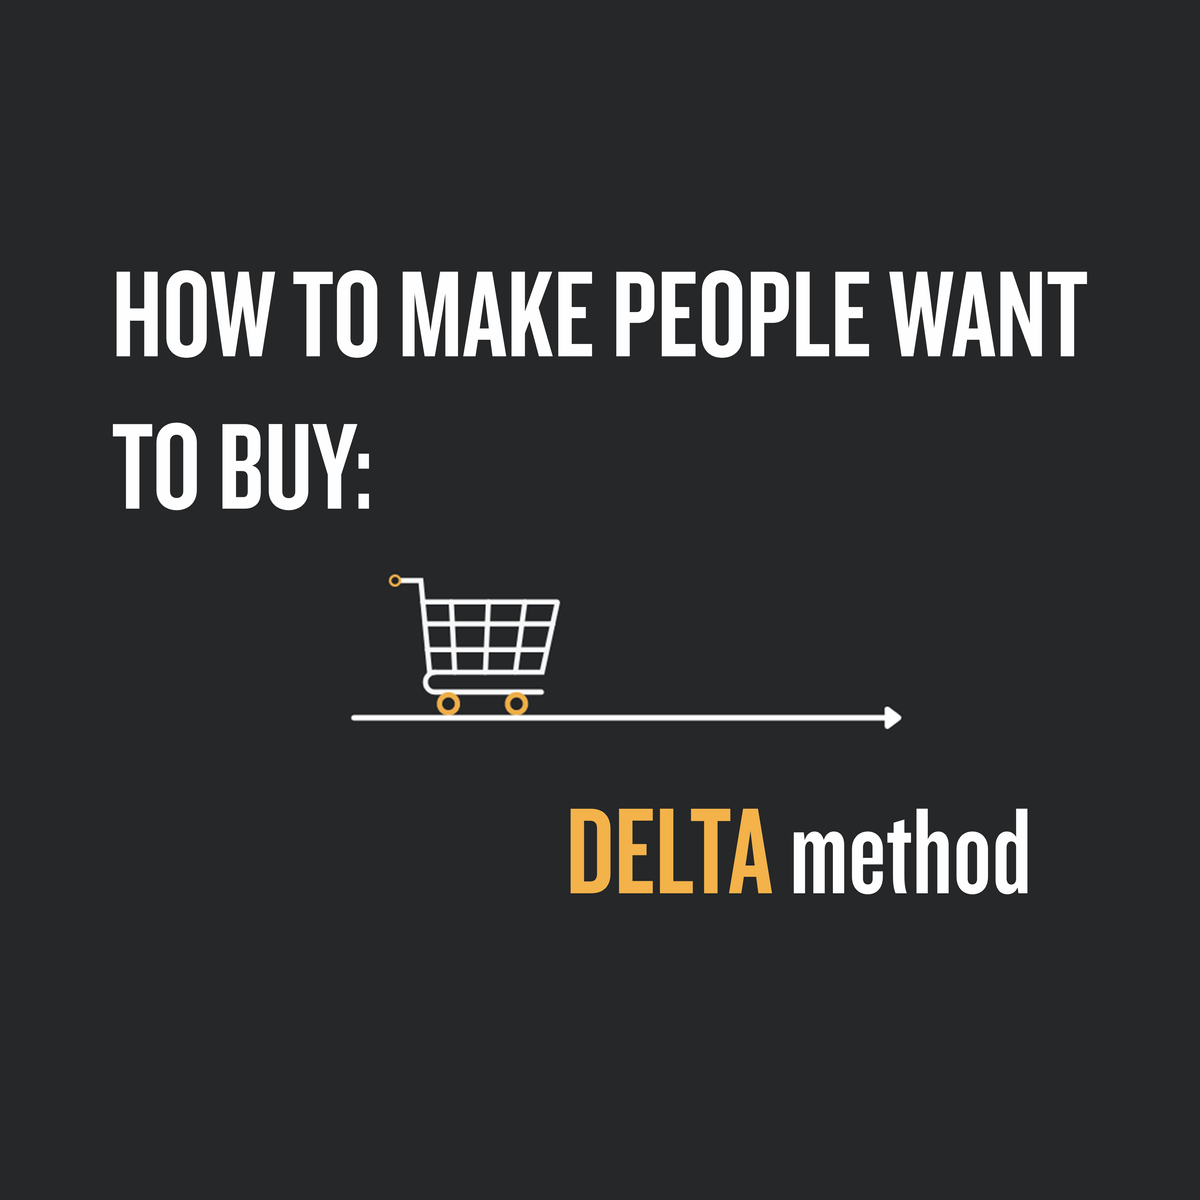 How To Make People Want To Buy: DELTA method